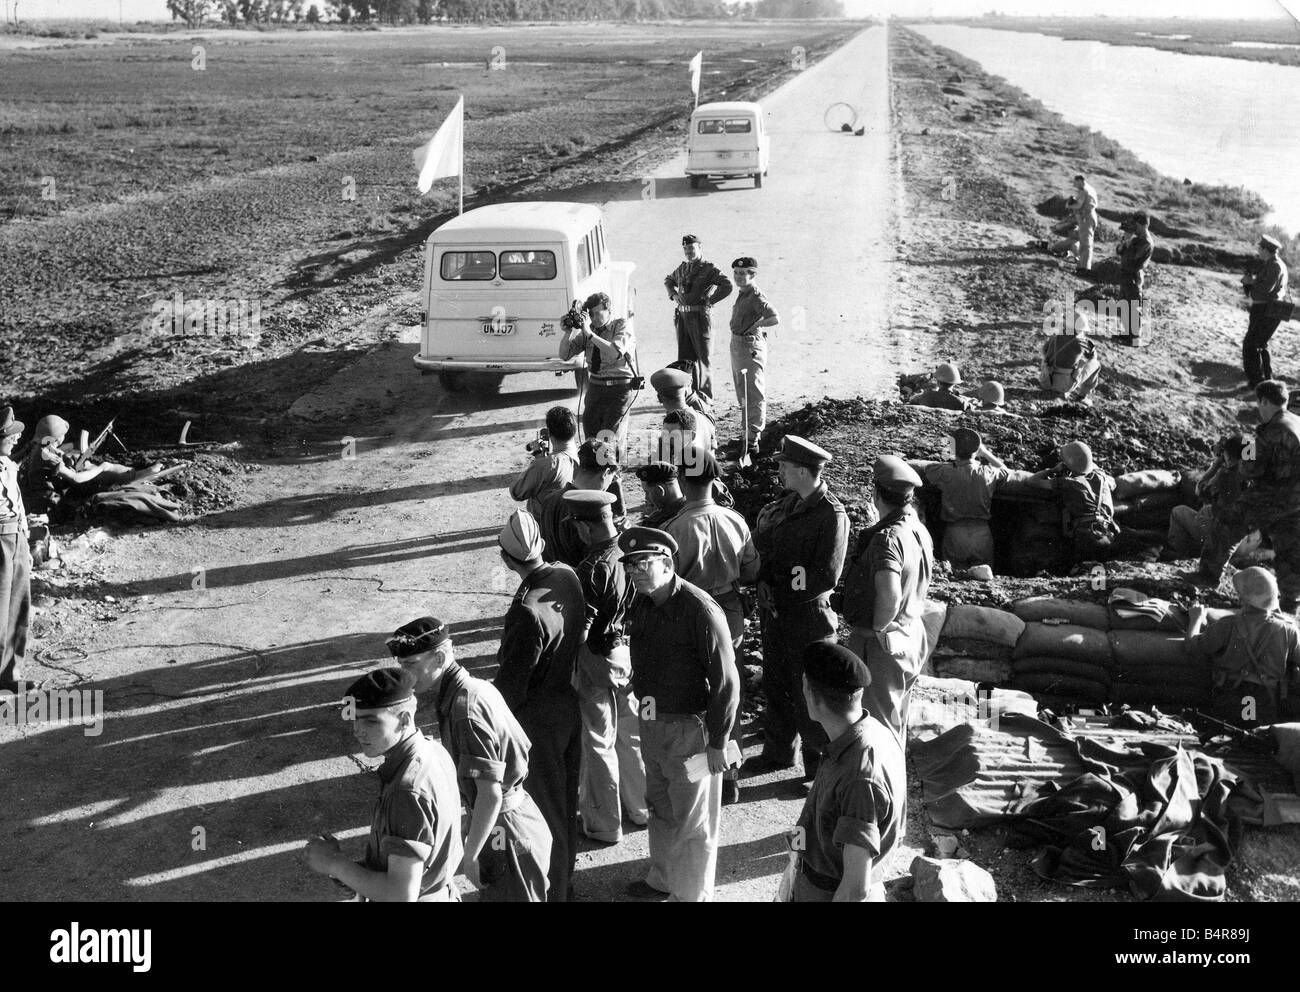 The Suez crisis part of the convoy of United Nations jeeps carrying white flags are here seen heading towards the egyptian lines which are situated besides the trees along the road 15 11 56 Stock Photo